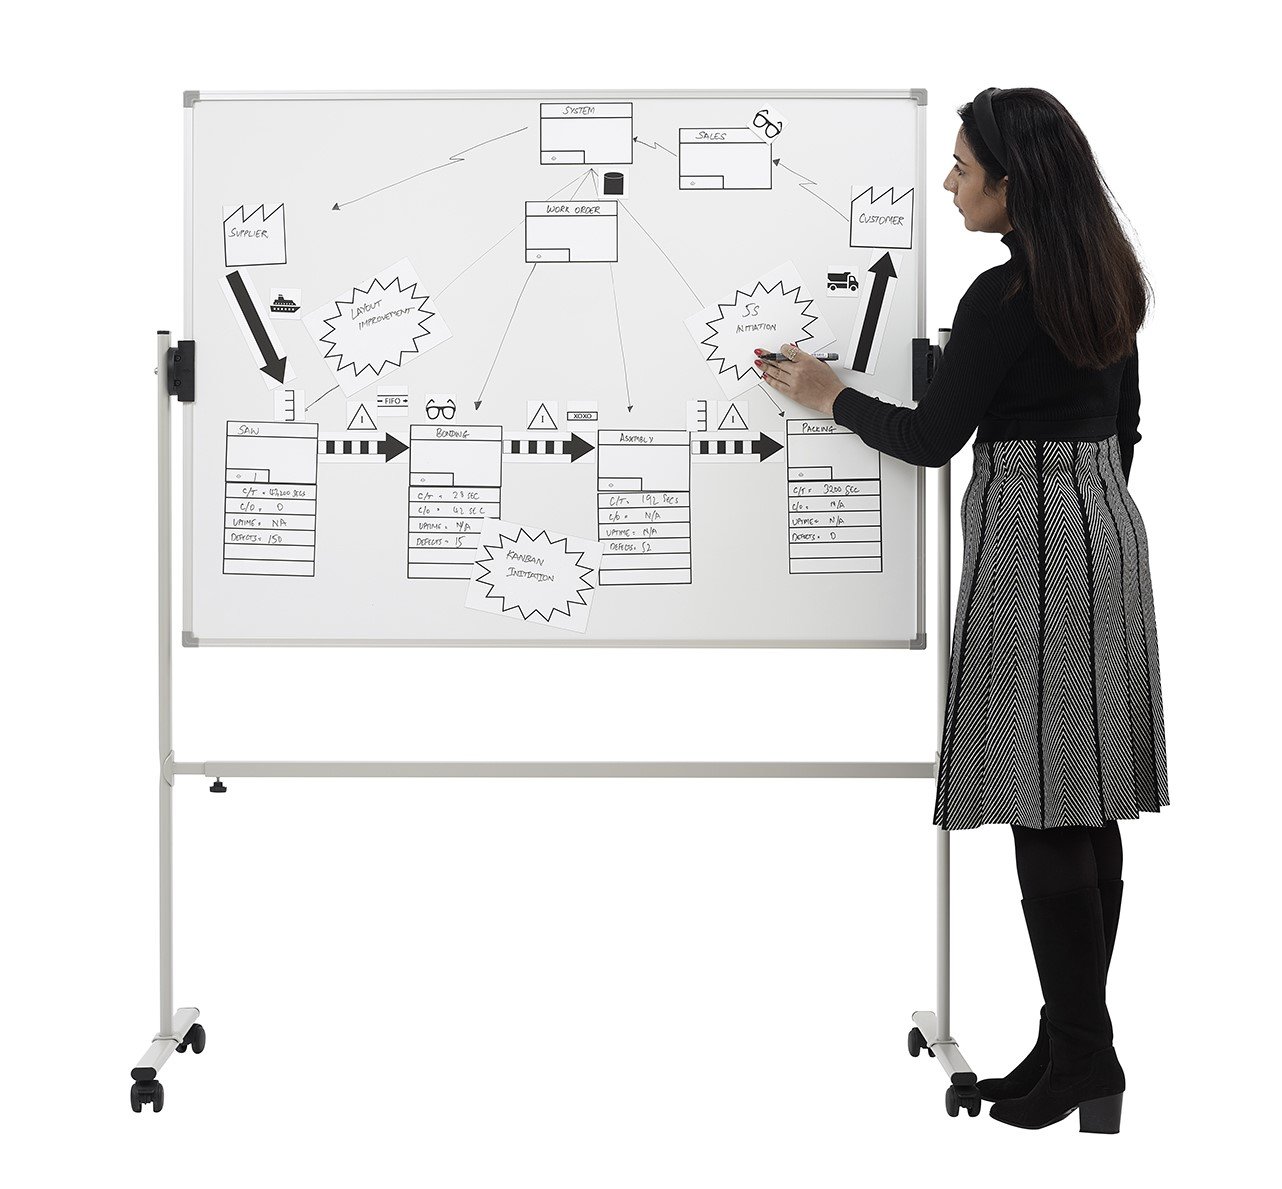 Mobile value stream mapping whiteboard